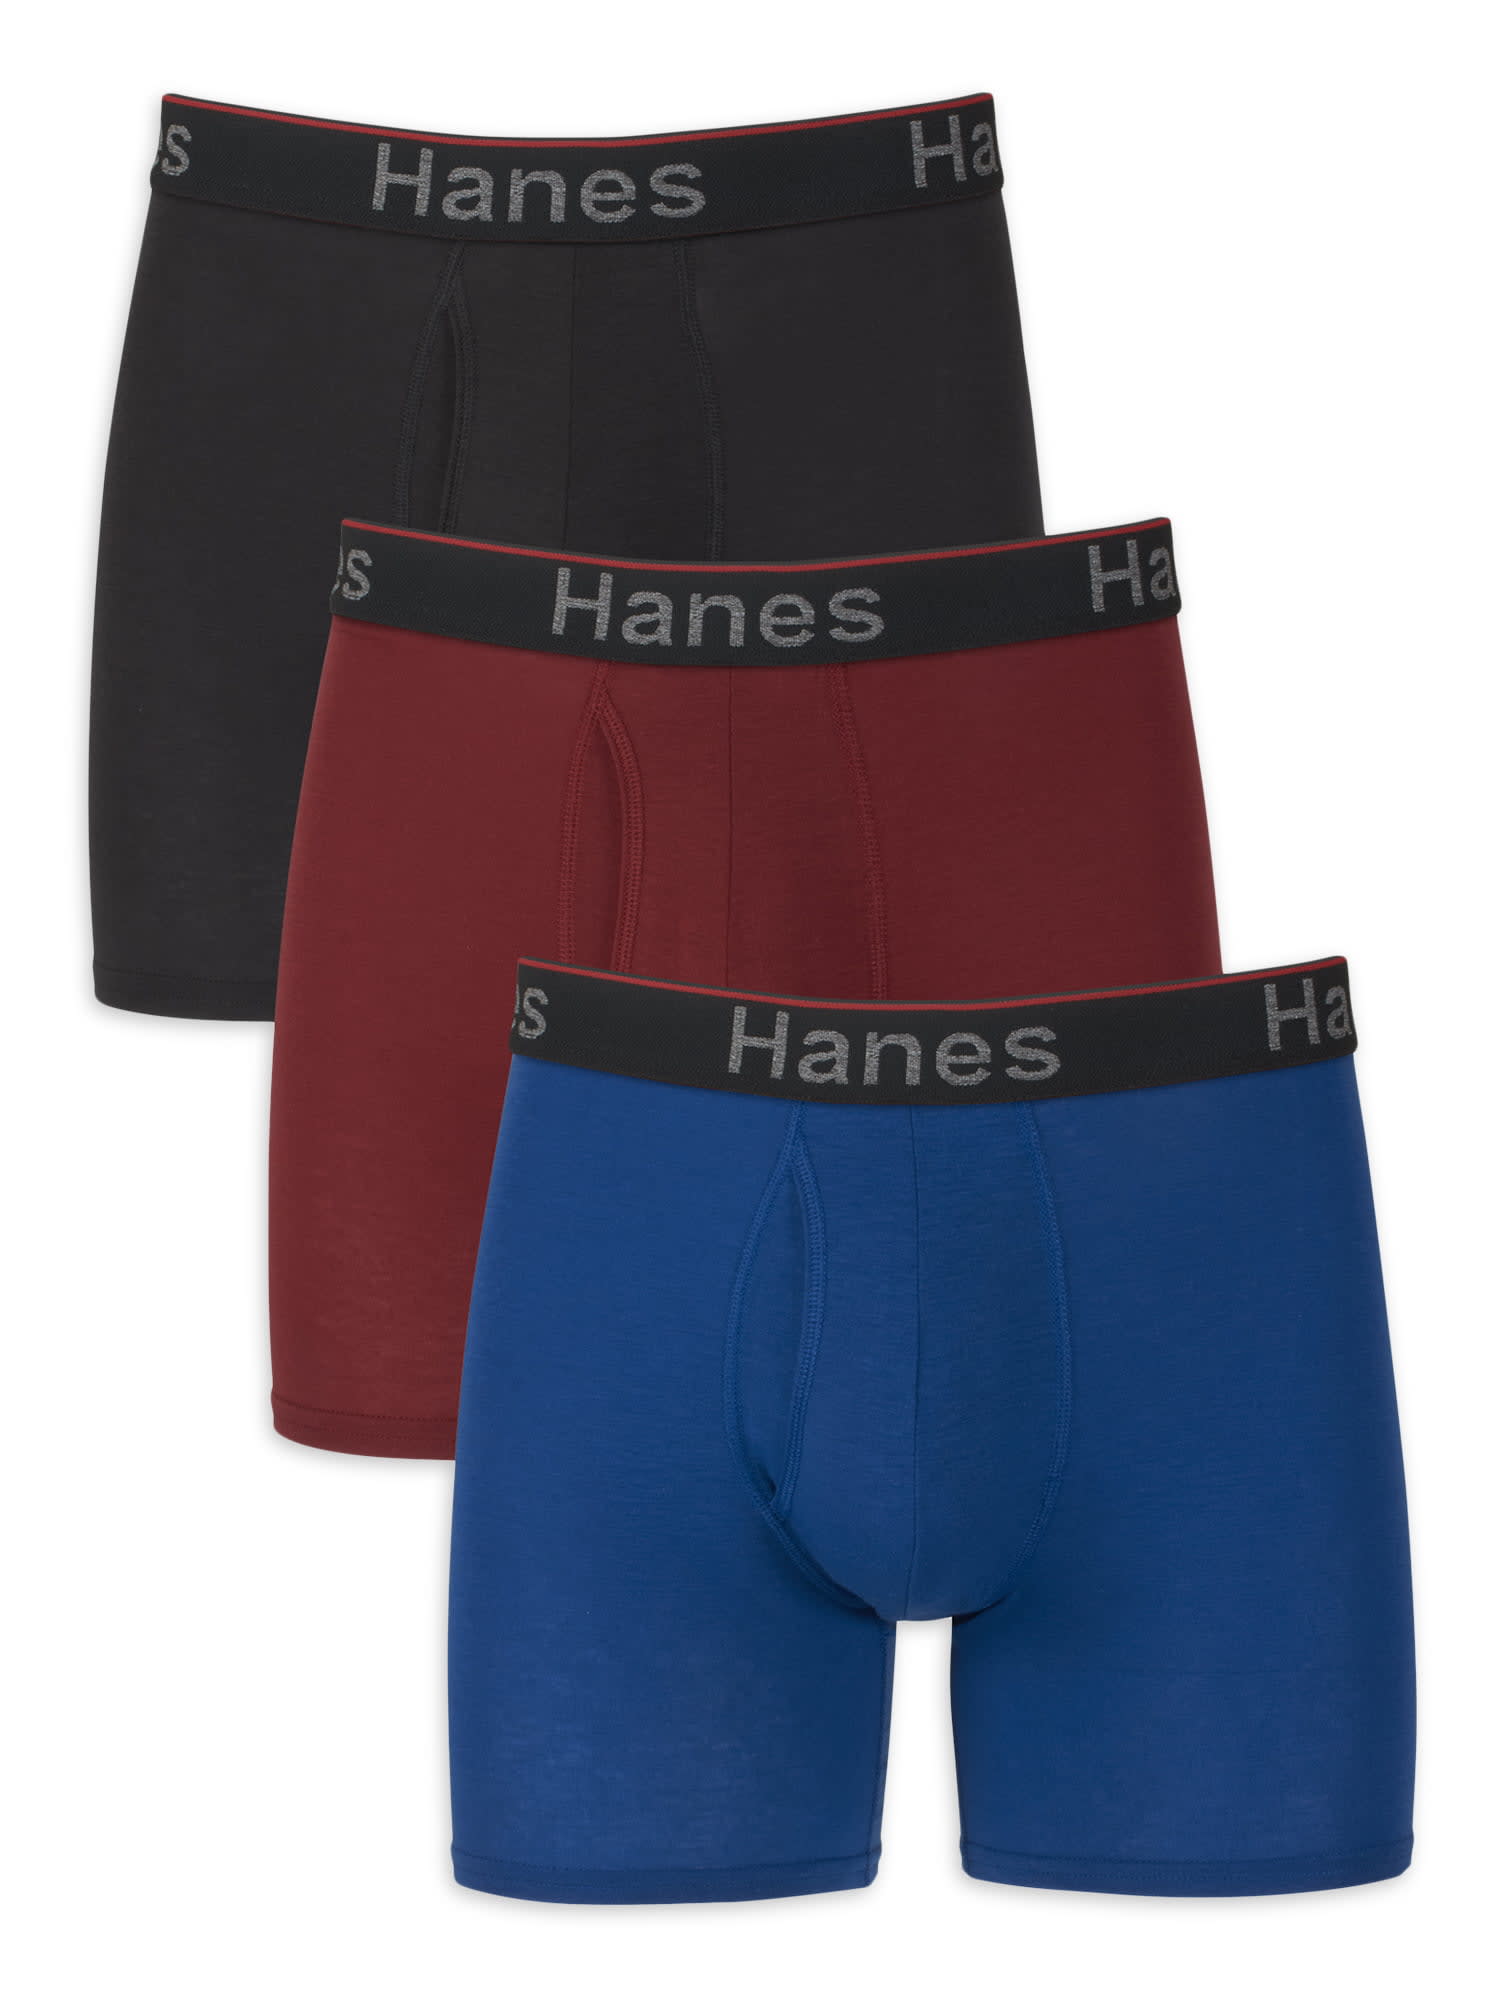 Hanes X-Temp Total Support Pouch Men's Trunks, Anti-Chafing Underwear,  3-Pack